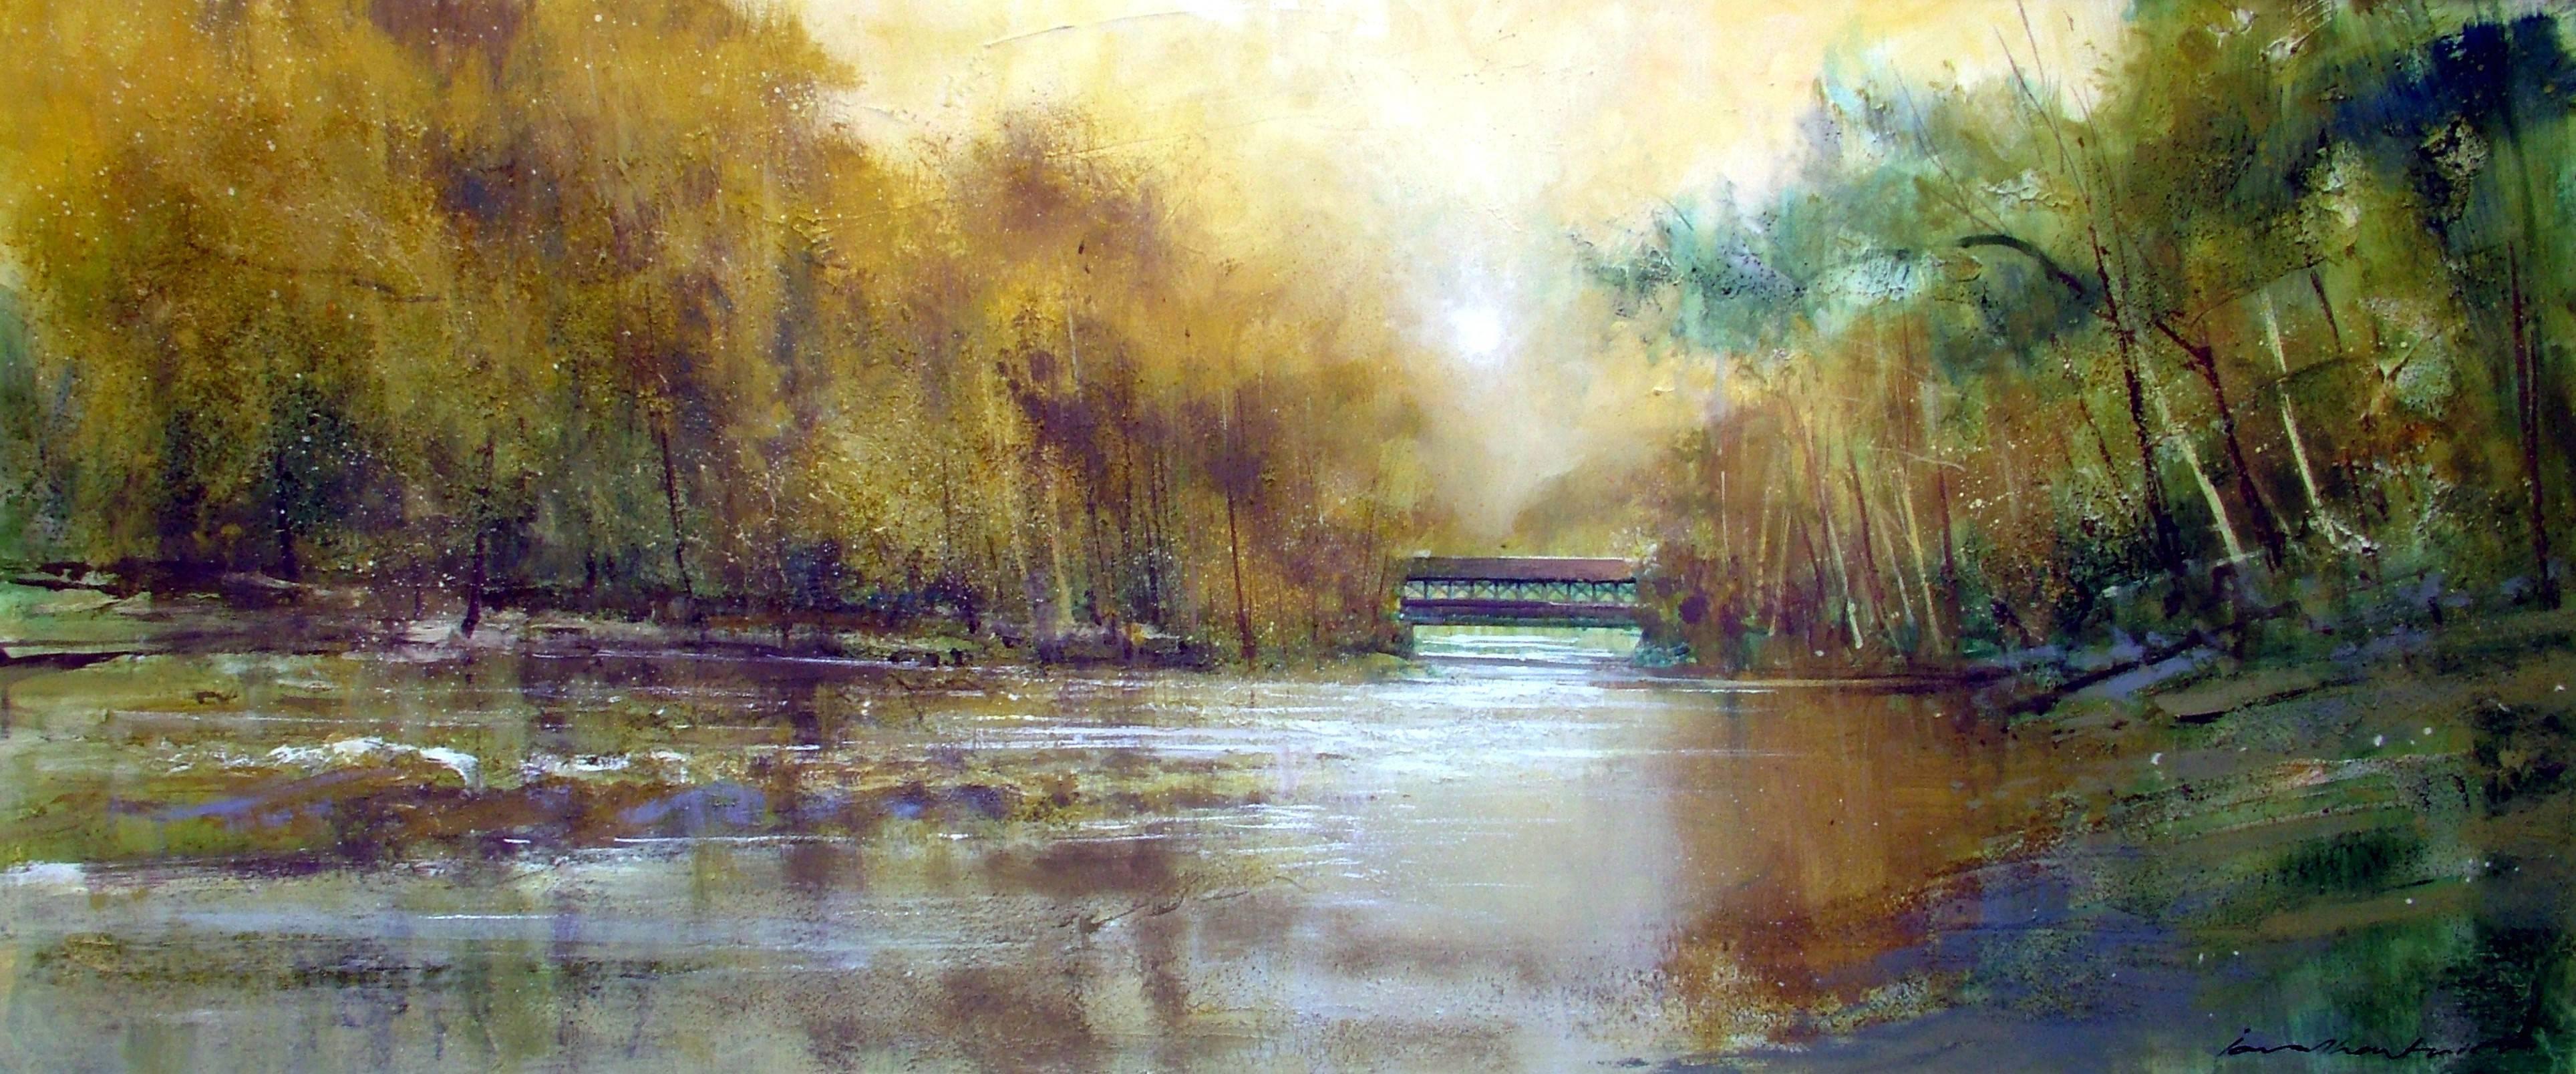 Jonathan Trim Abstract Painting - Albany Covered Bridge, New Hampshire  abstract landscape painting 